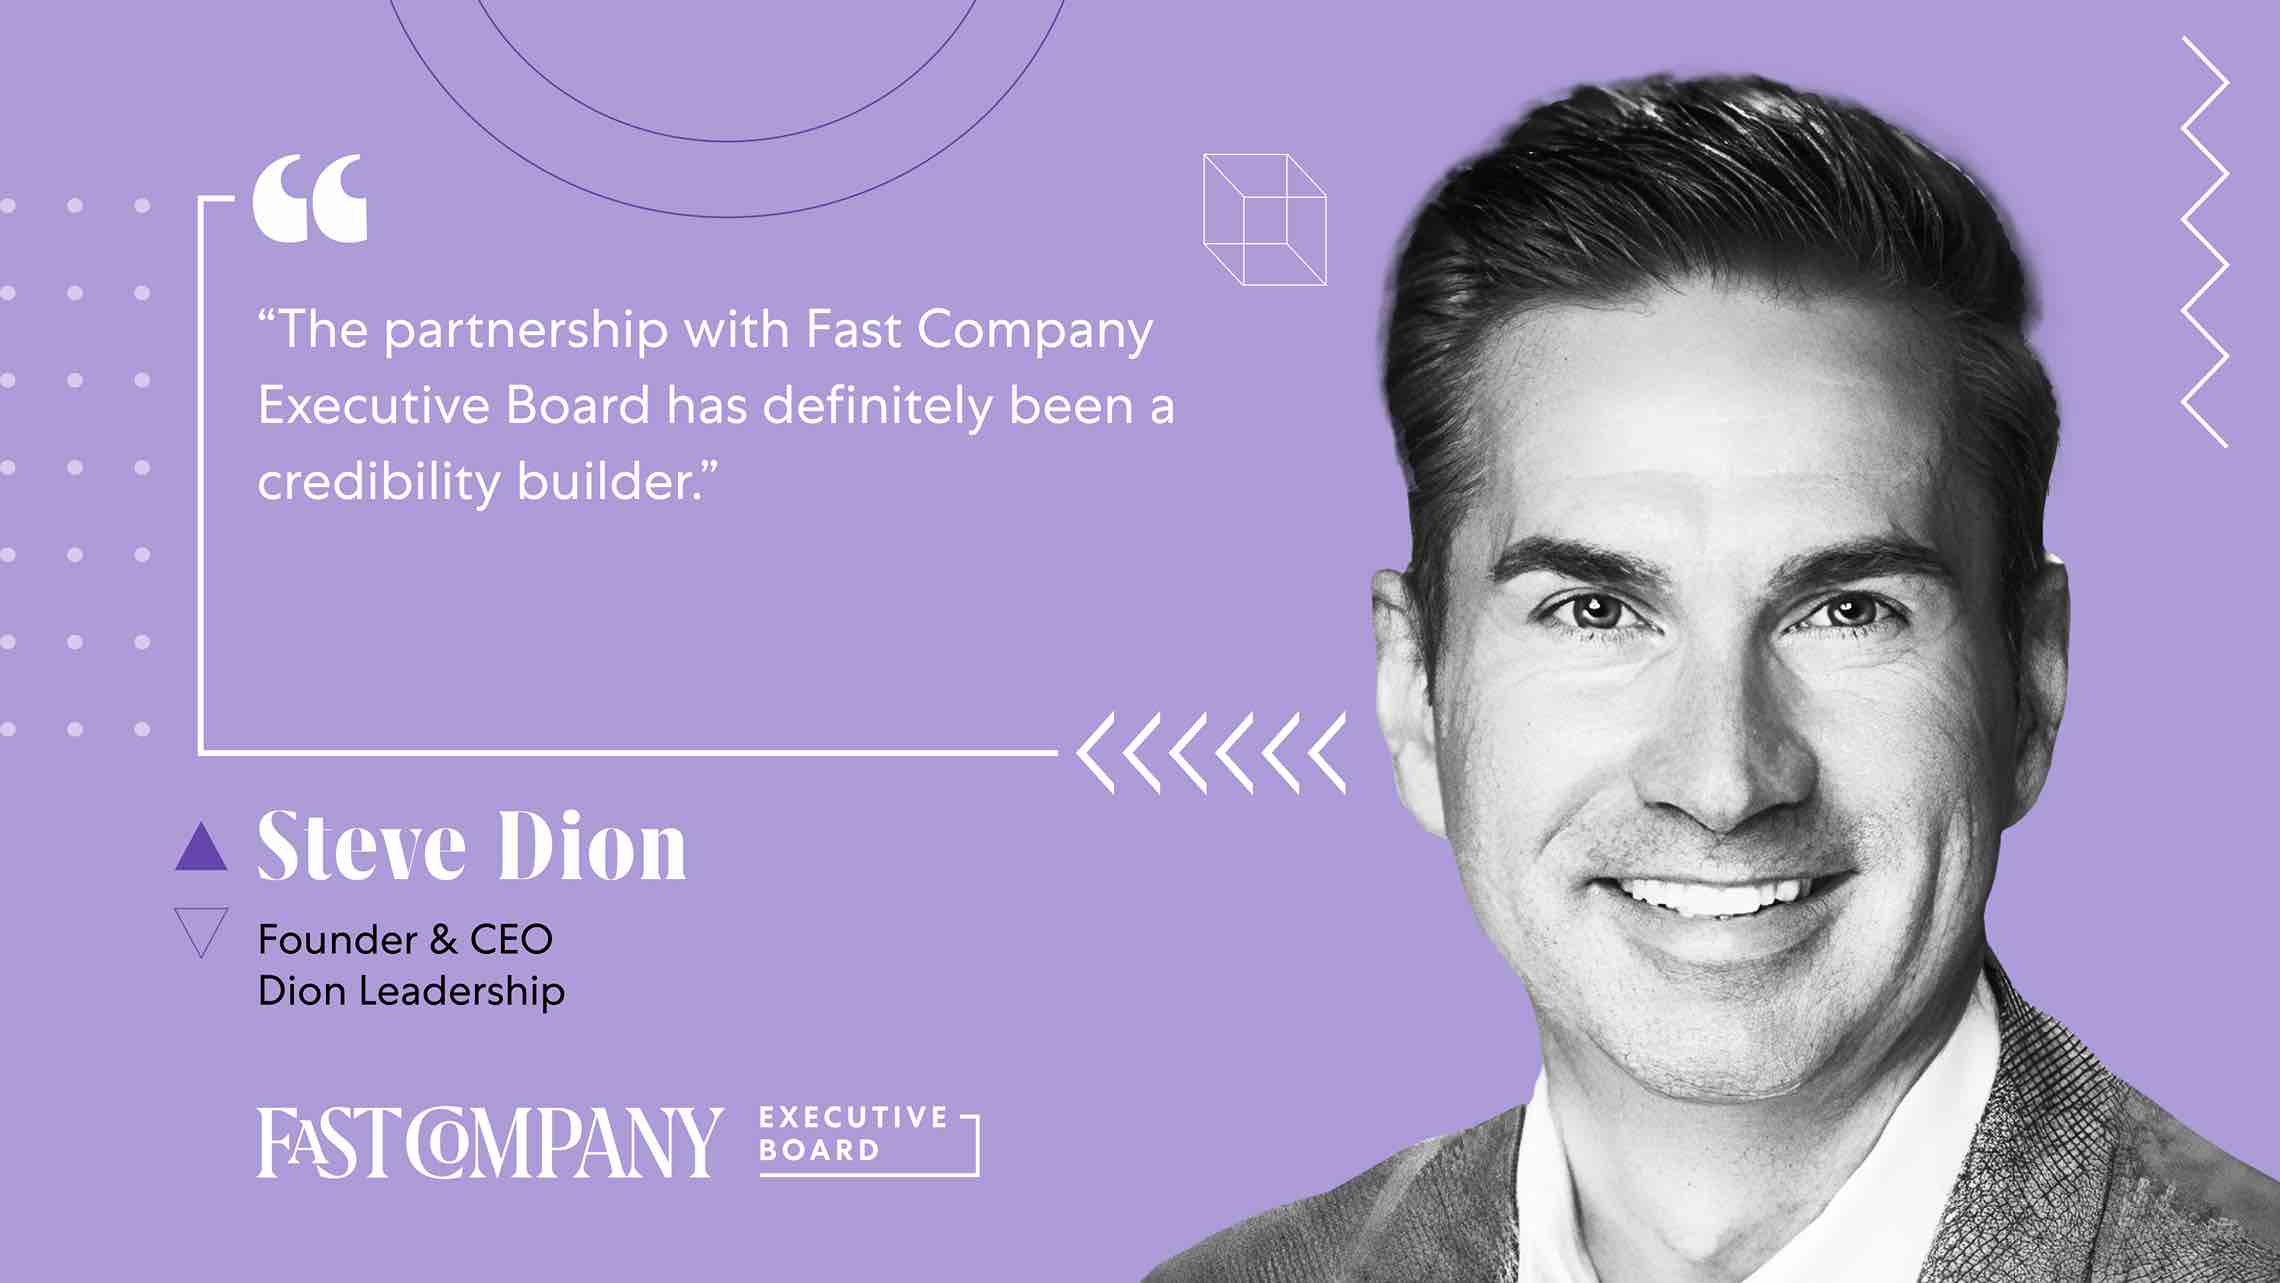 Fast Company Executive Board is a Credibility Builder for Steve Dion